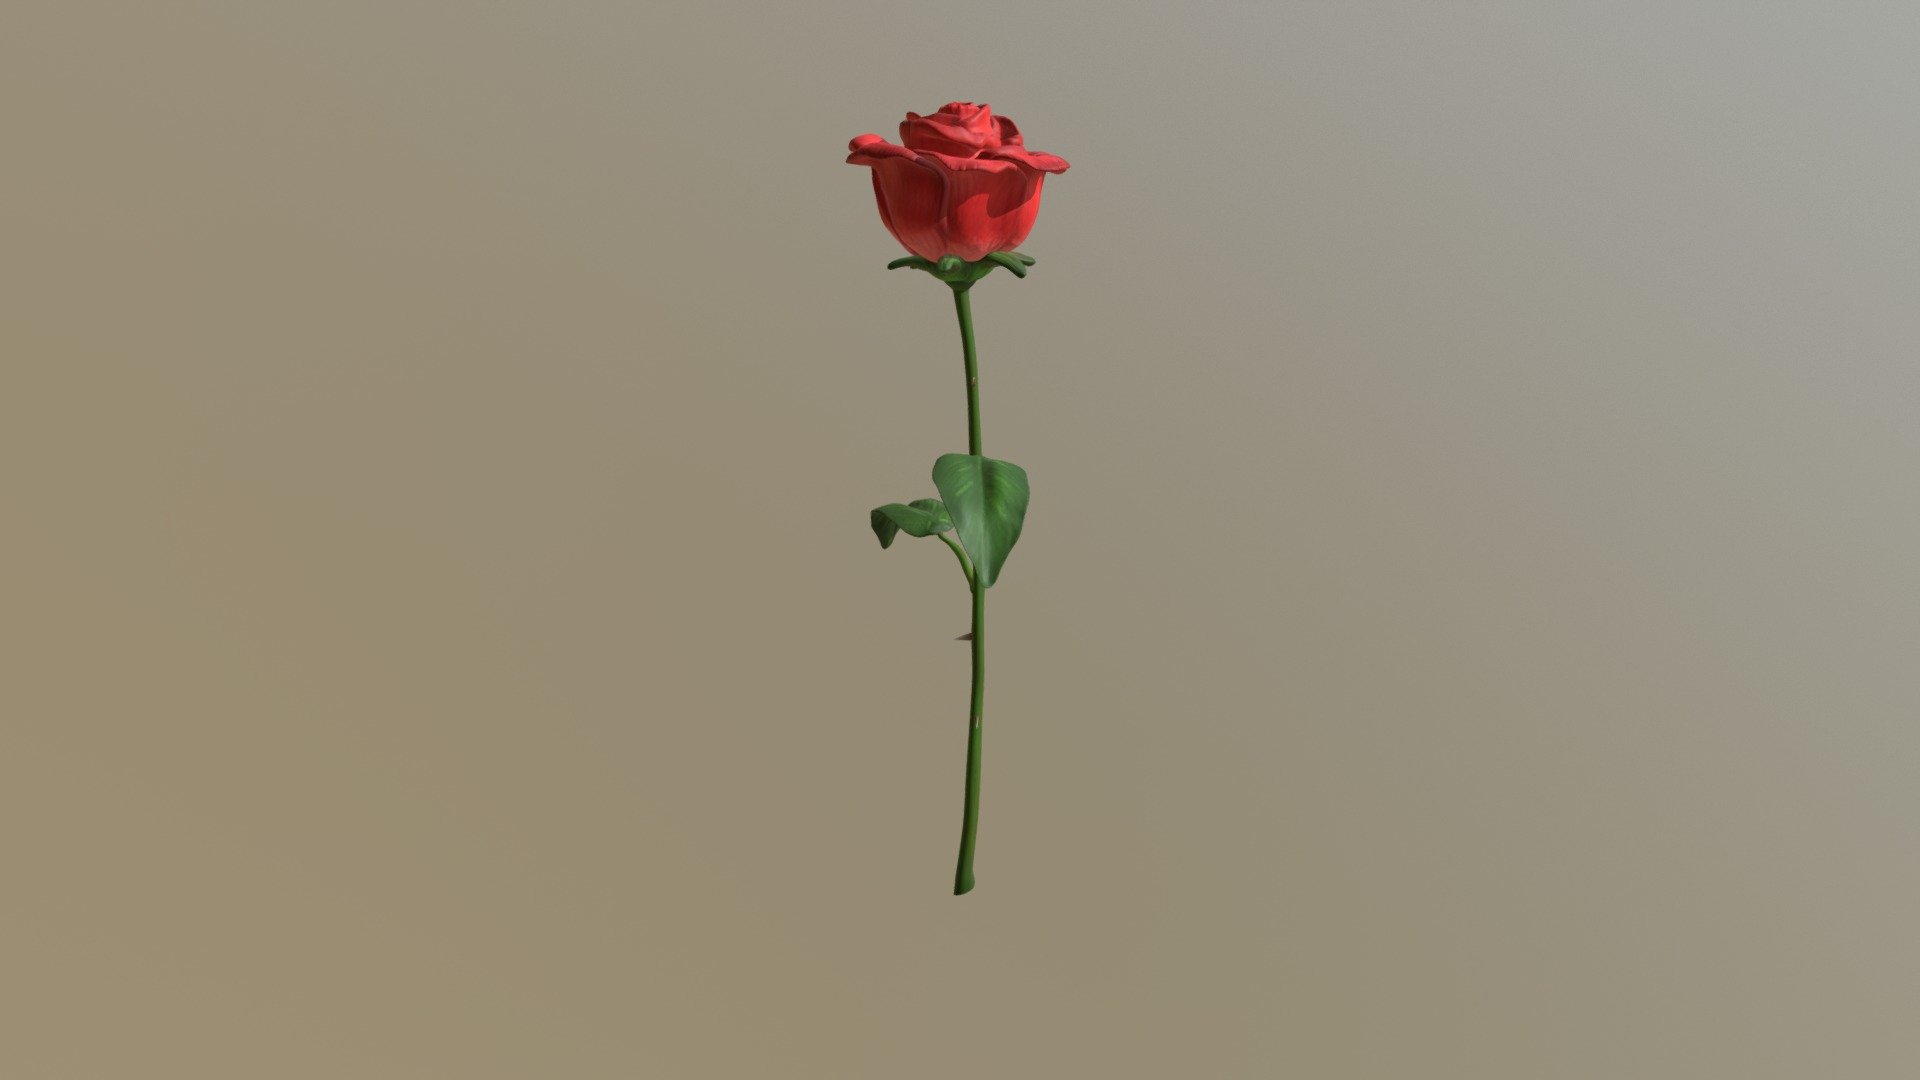 This is a rose I sculpted and painted in only a few hours. Just a quick project I did while thinking of a friend.

Sculpt created and painted using ZBrush 4R8 - Red Rose Sculpt - 3D model by Jonathan Hart (@JonathanHart3D) 3d model